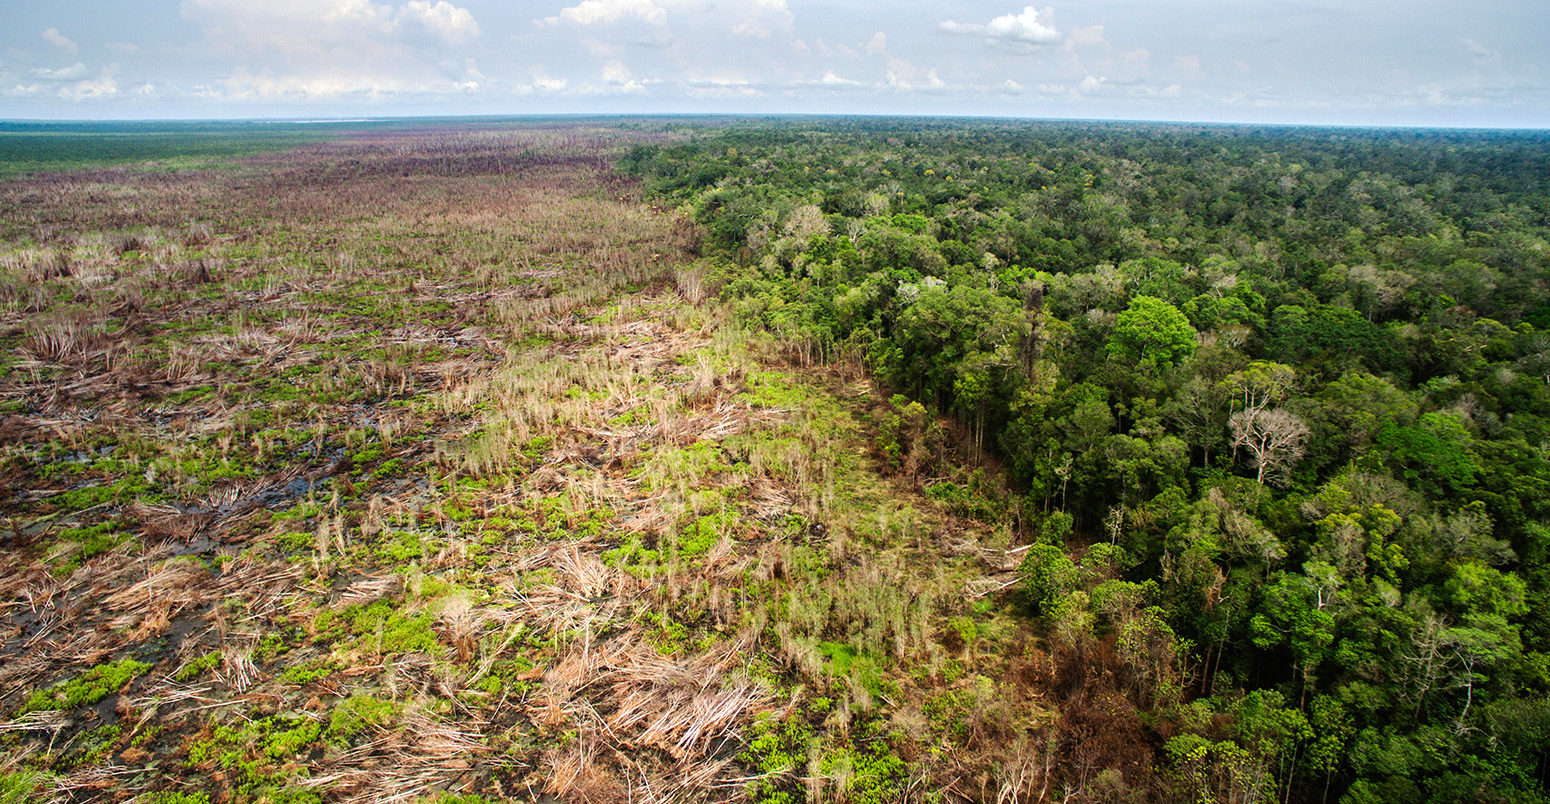 Deforestation in Tanjung Puting National Park, Borneo, Indonesia. Credit: Minden Pictures / Alamy Stock Photo. H87759